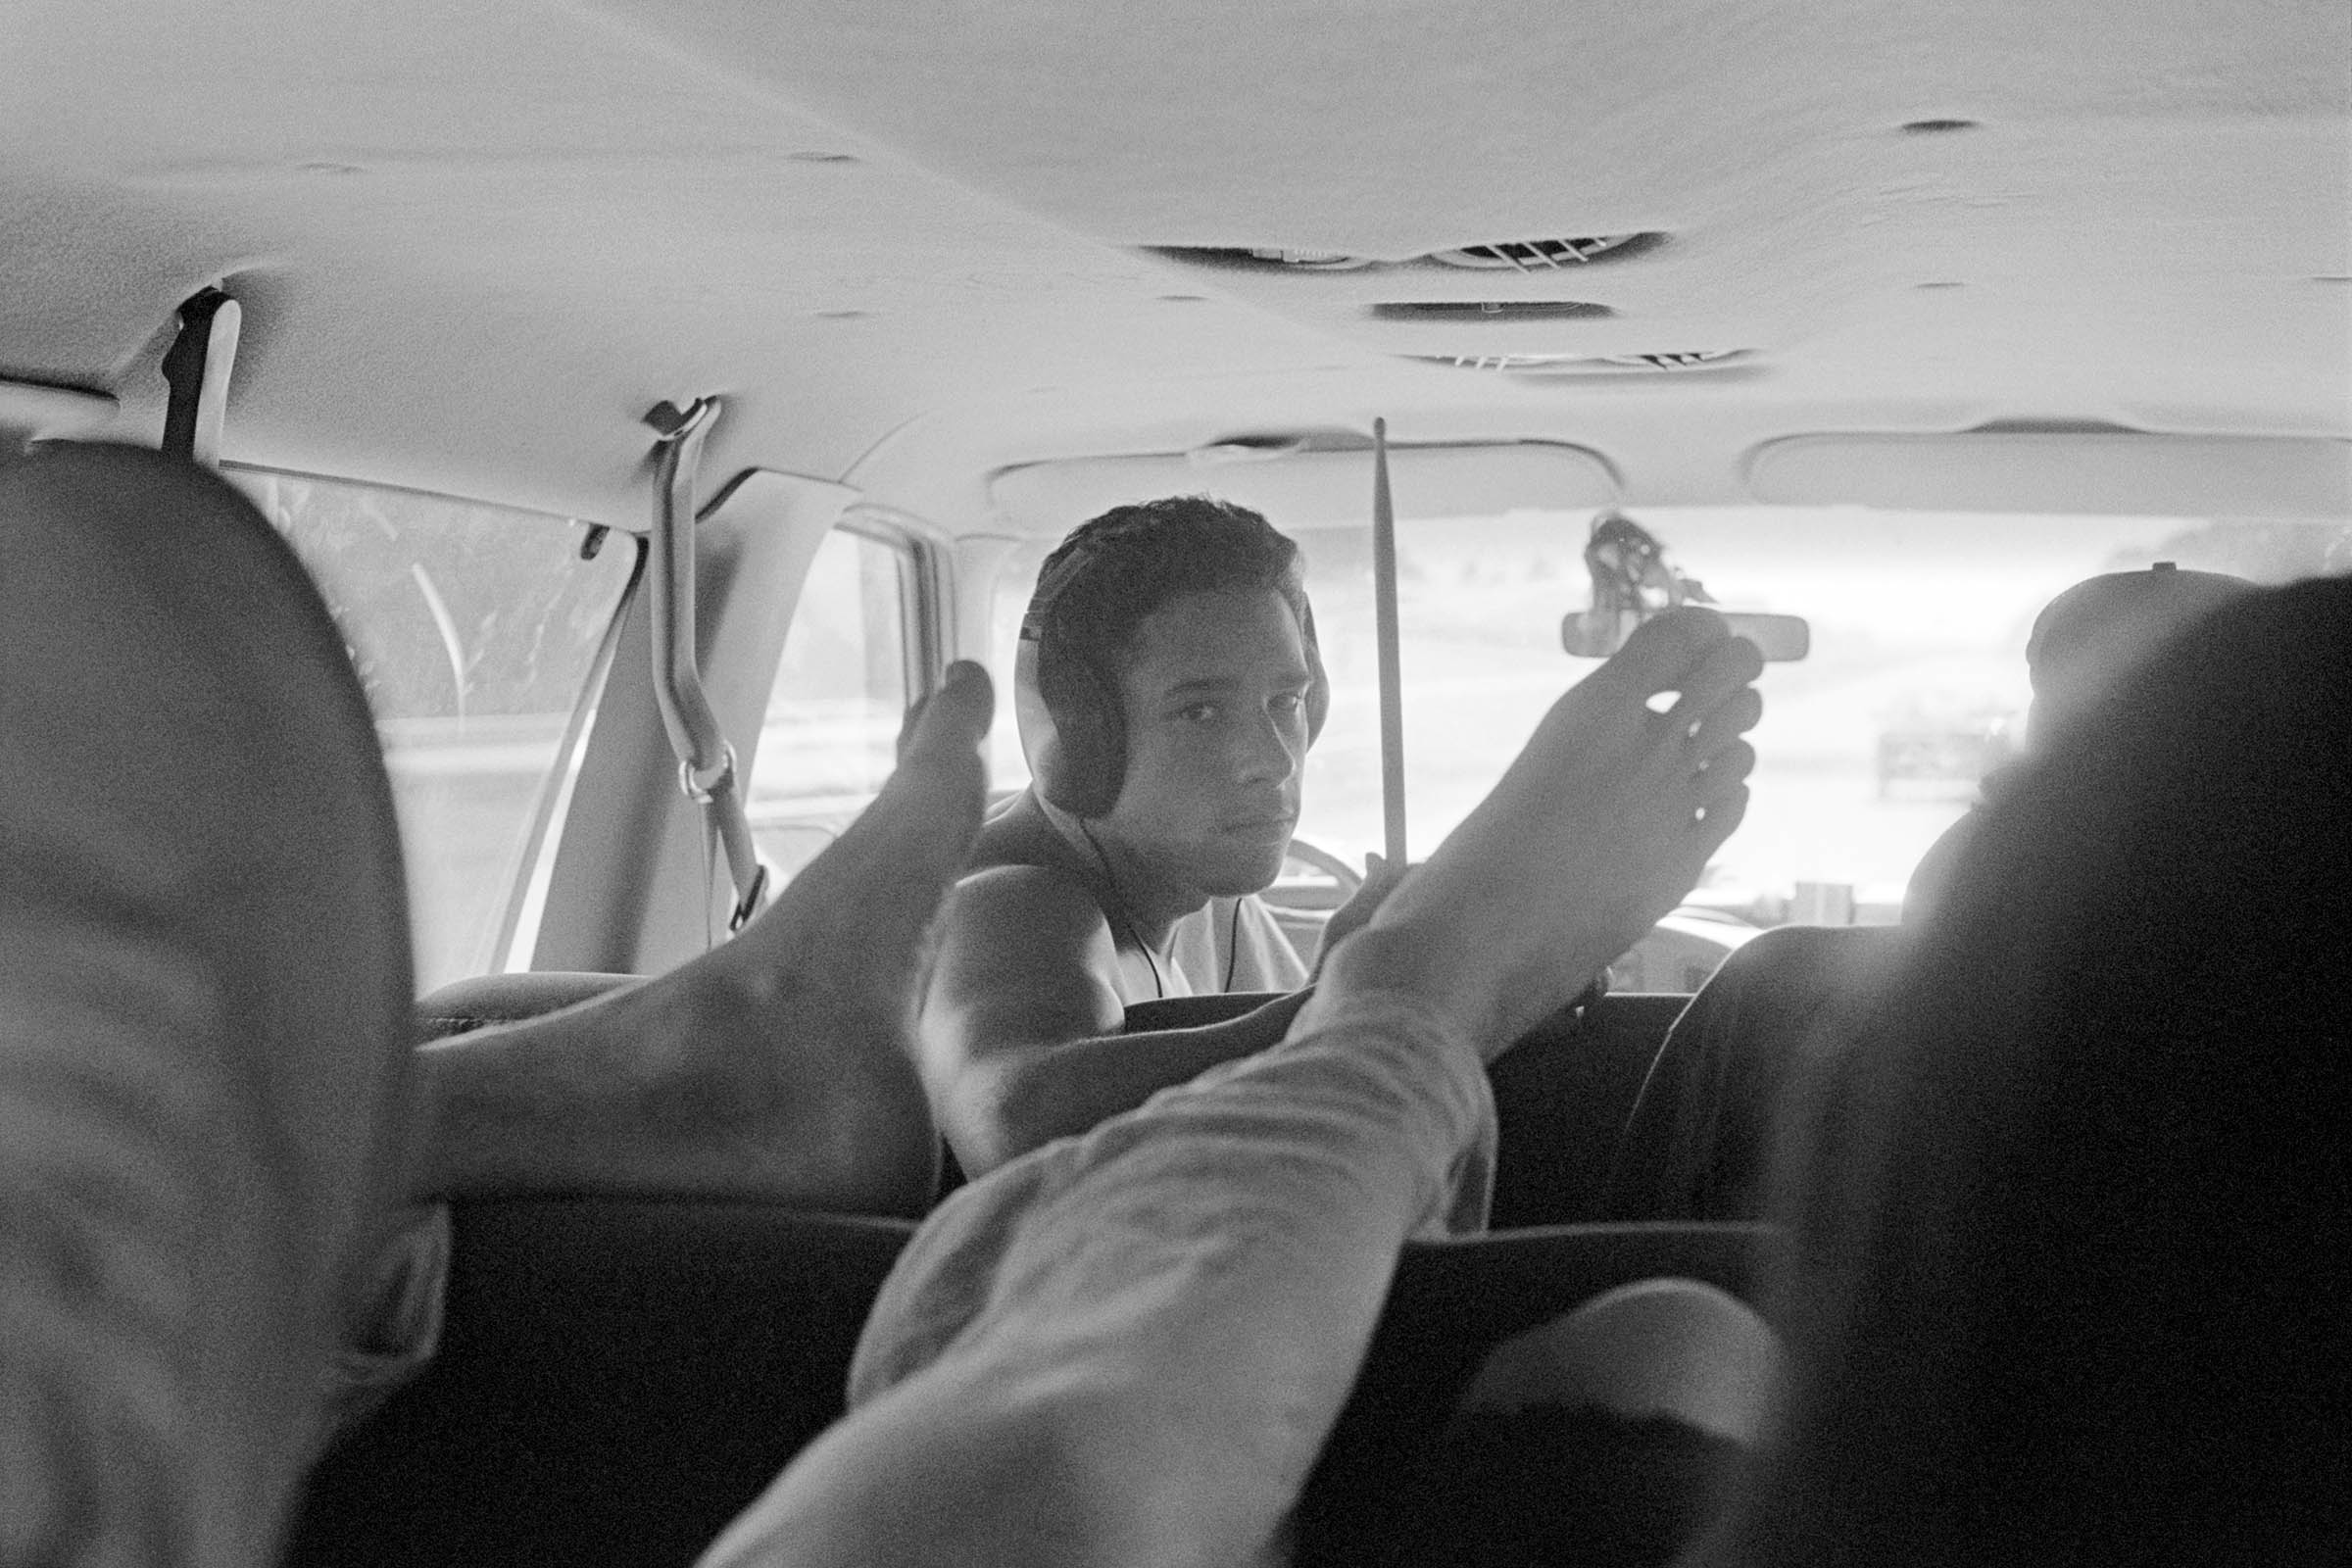 a man with headphones on in a van, framed by someone's feet